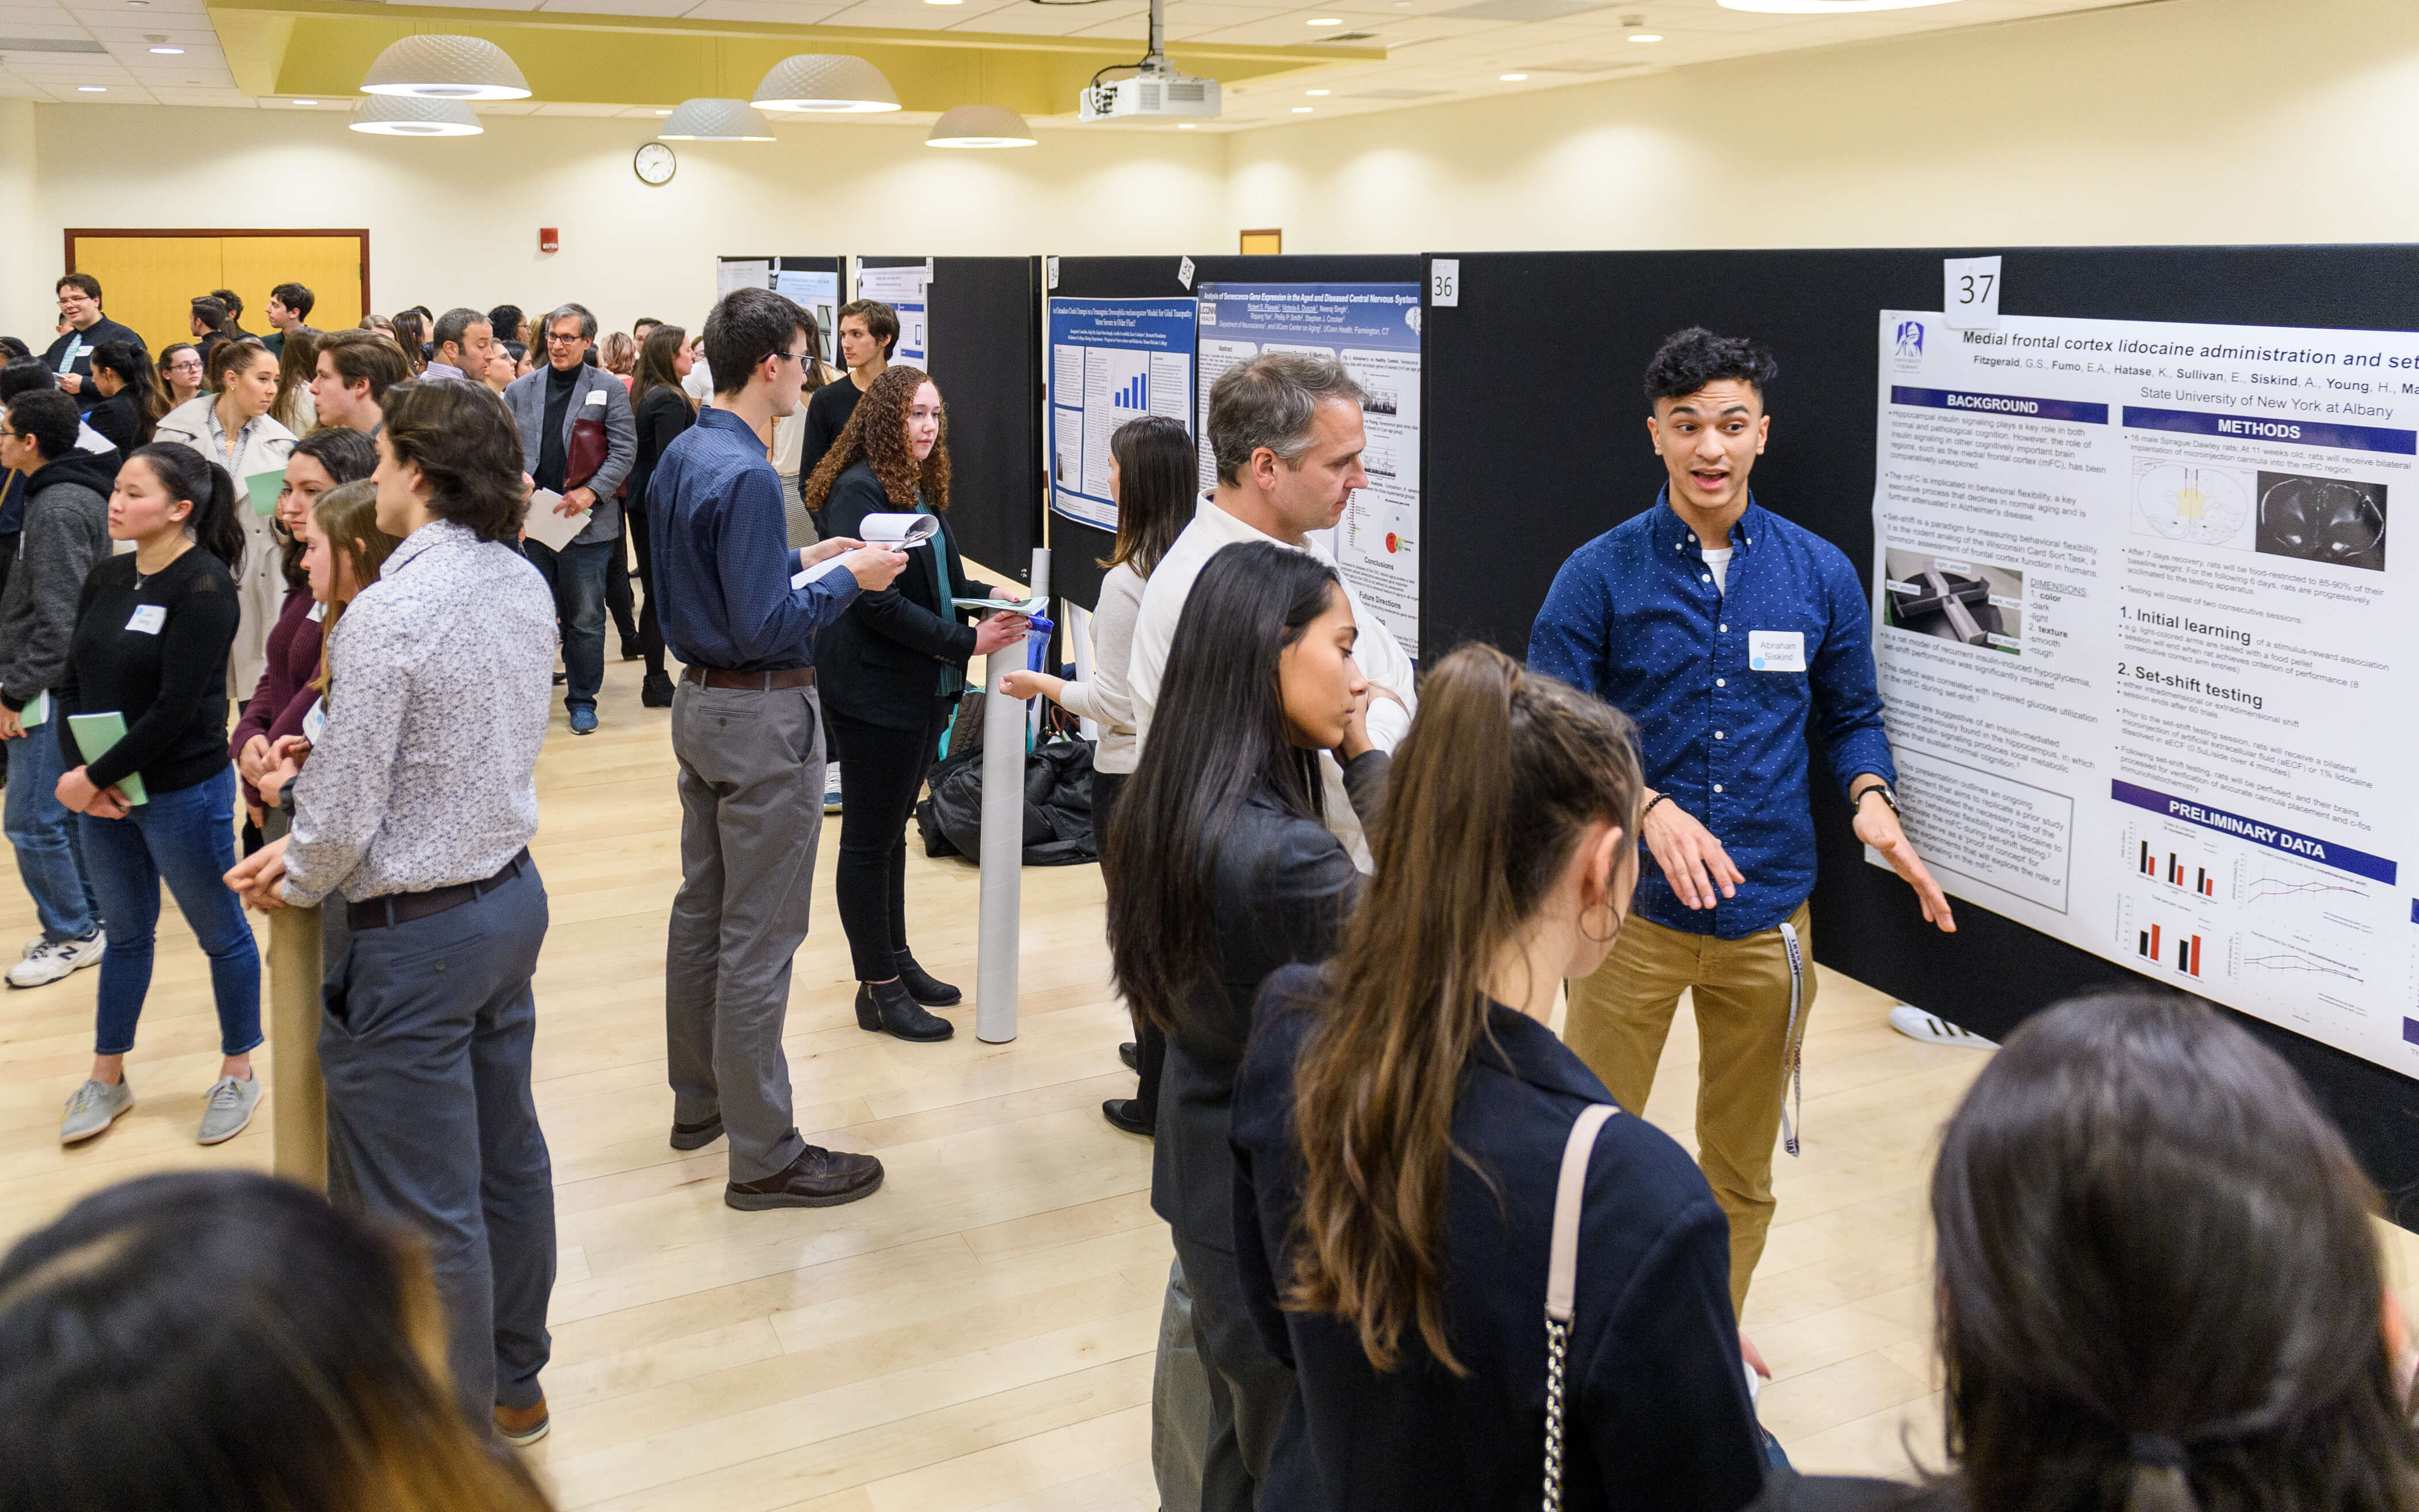 Students give presentations during various workshops at the Quinnipiac University School of Medicine Neuron Conference.